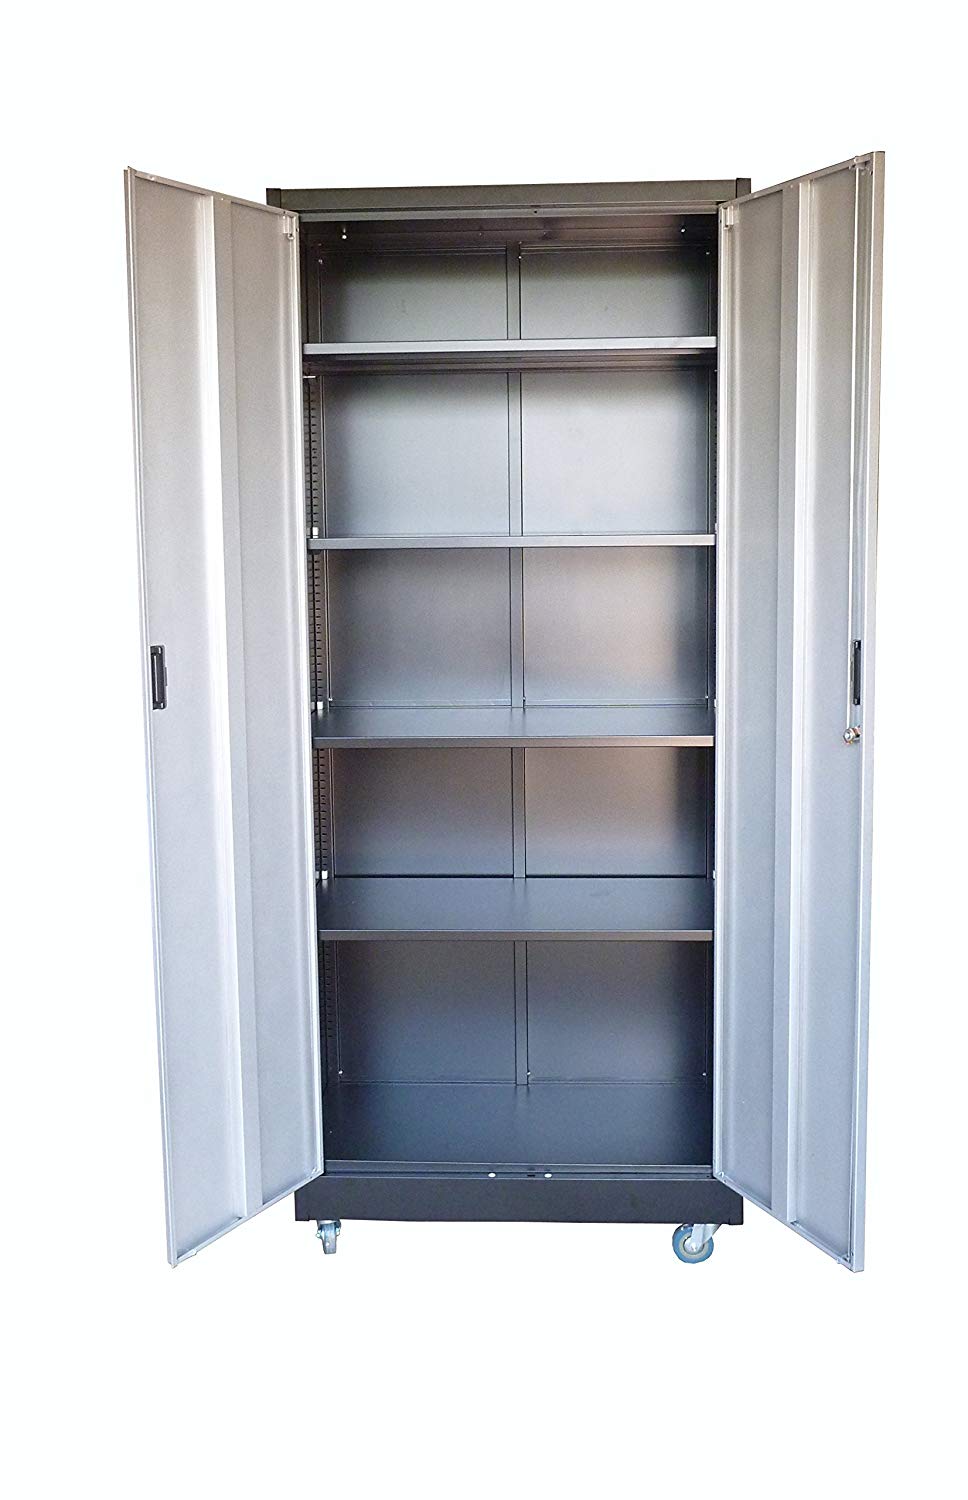  Kitchen Storage Cabinet With Doors On Wheels for Simple Design